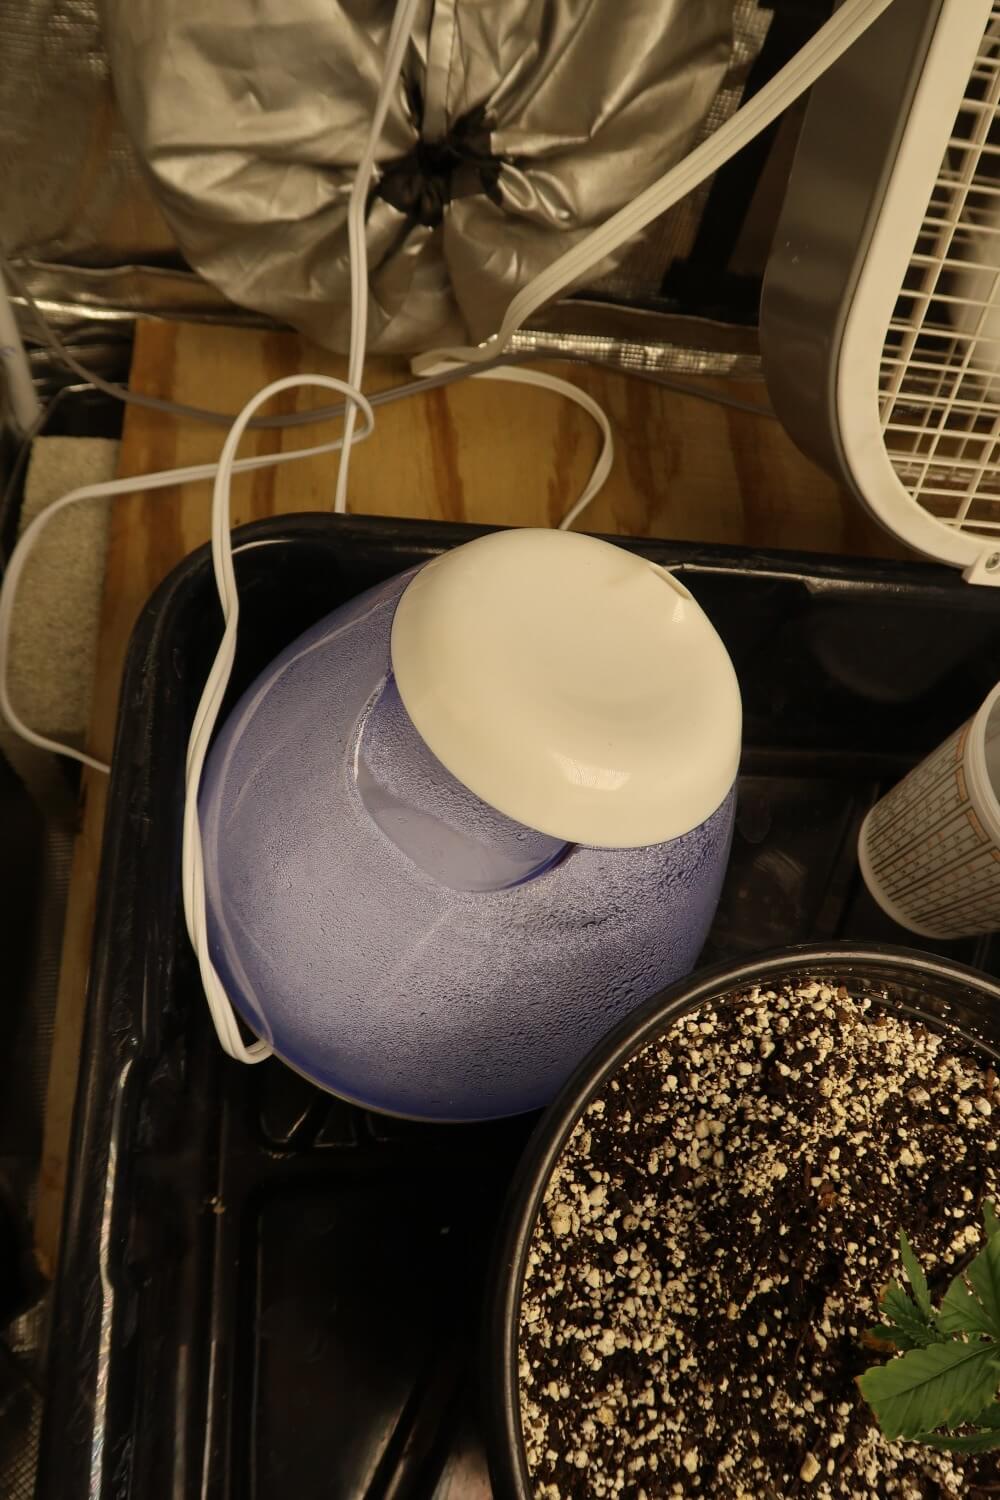 Check out my humidifier